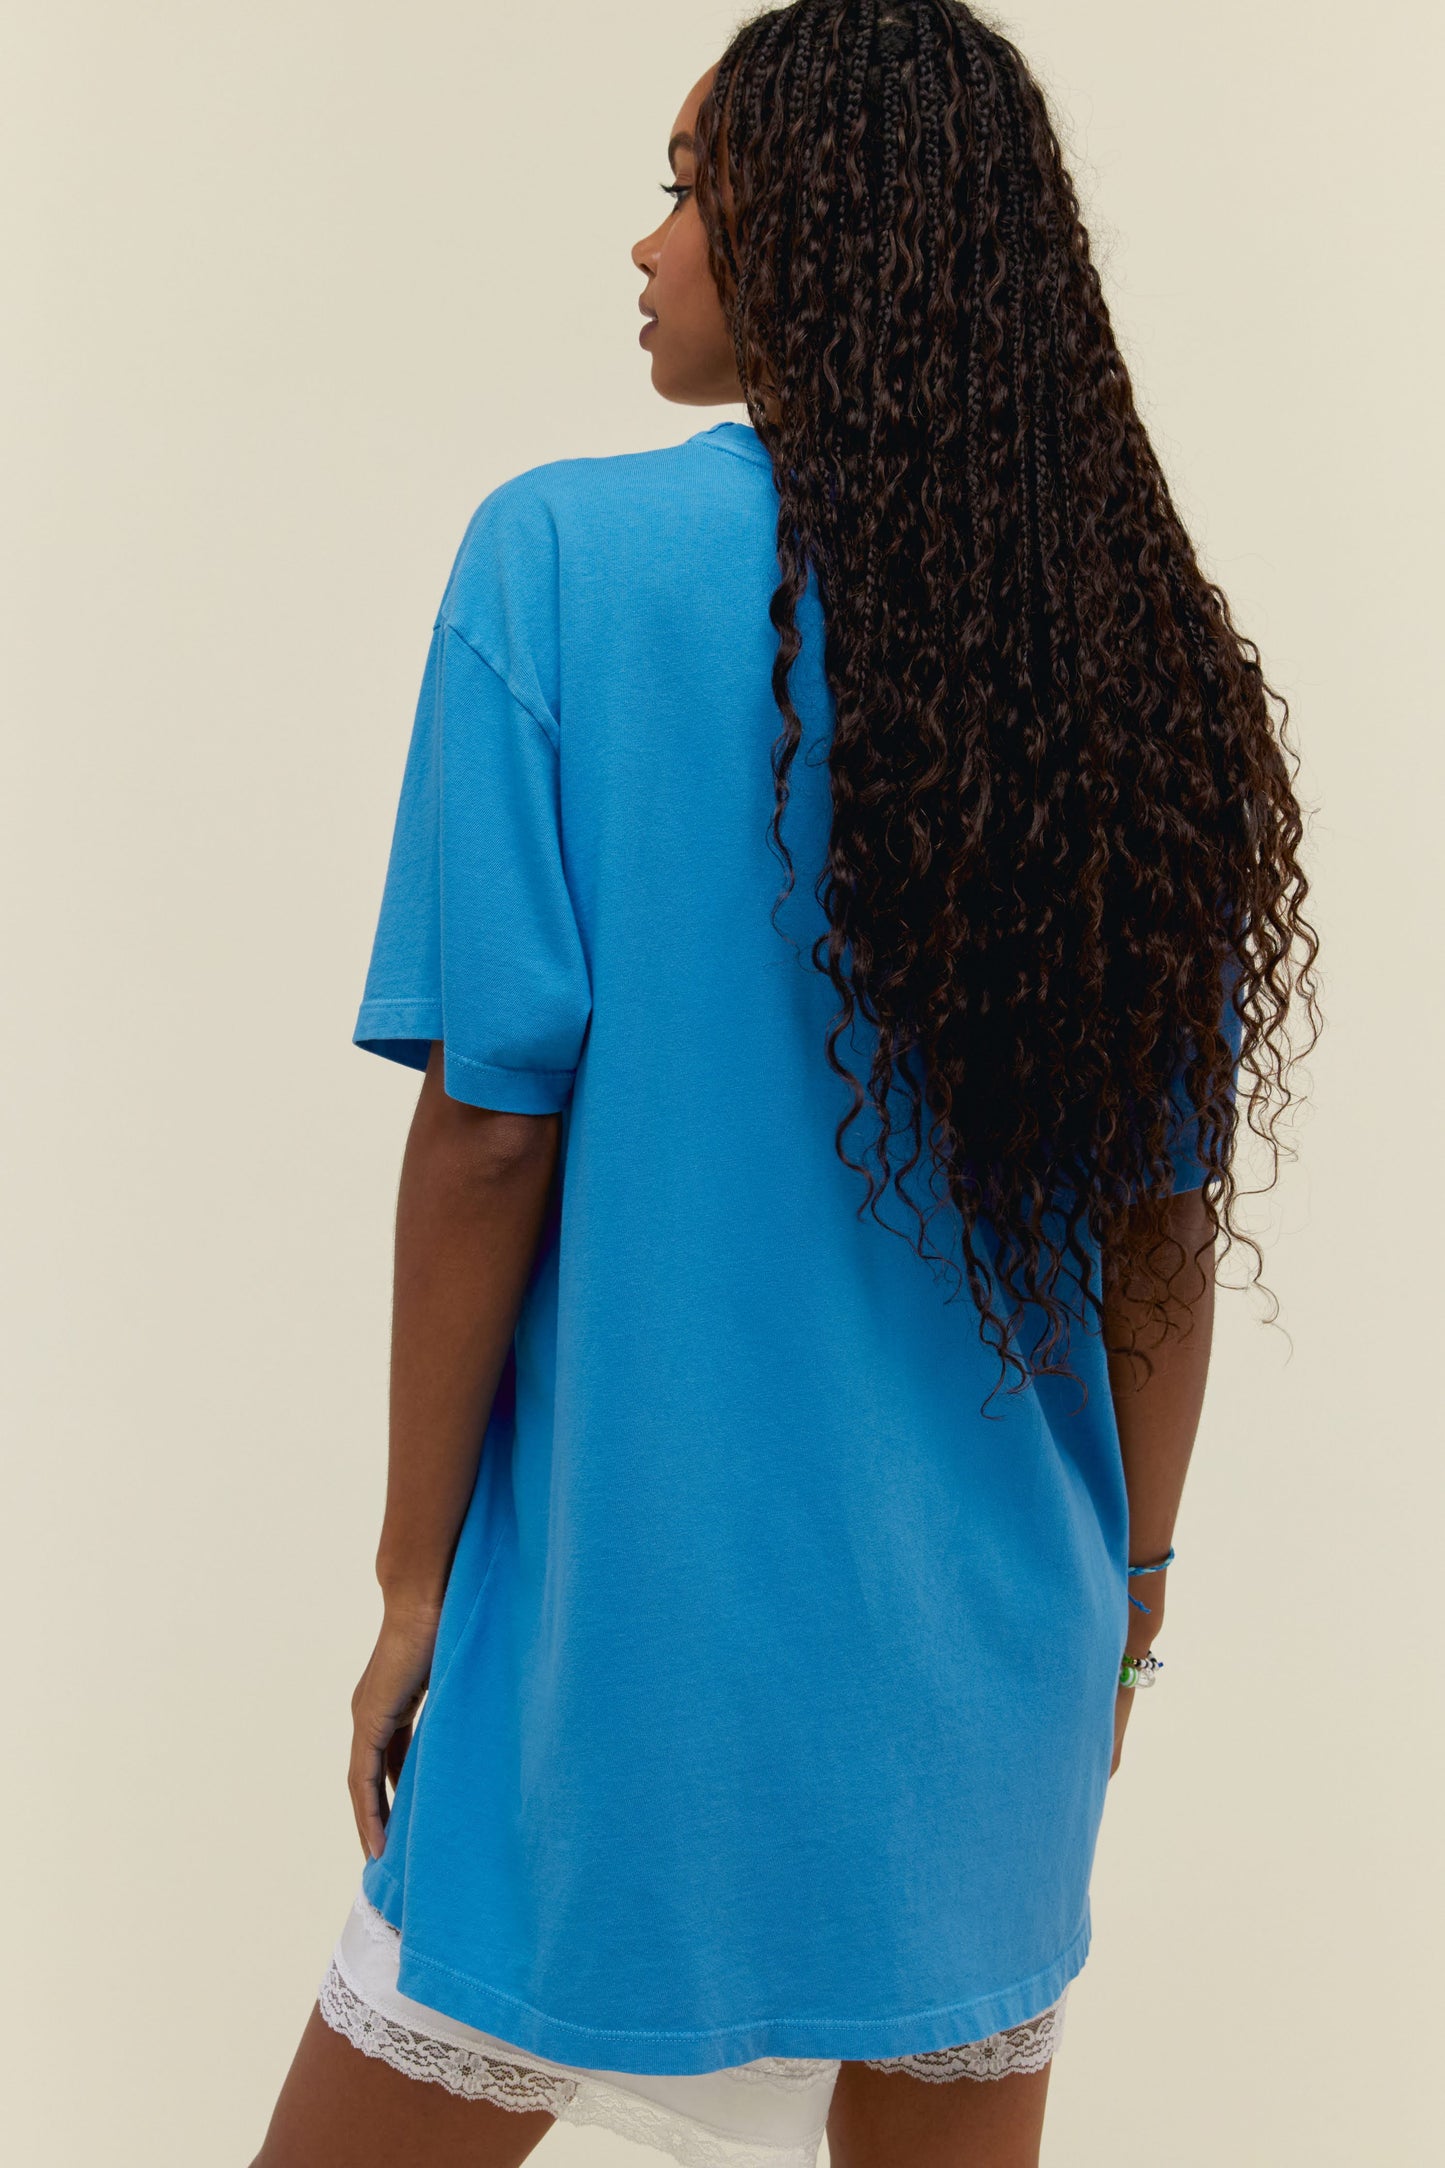 A dark-haired model featuring a blue t-shirt dress stamped with "Fleetwood Mac Rumours" on top centered with the graphic design of the same album art